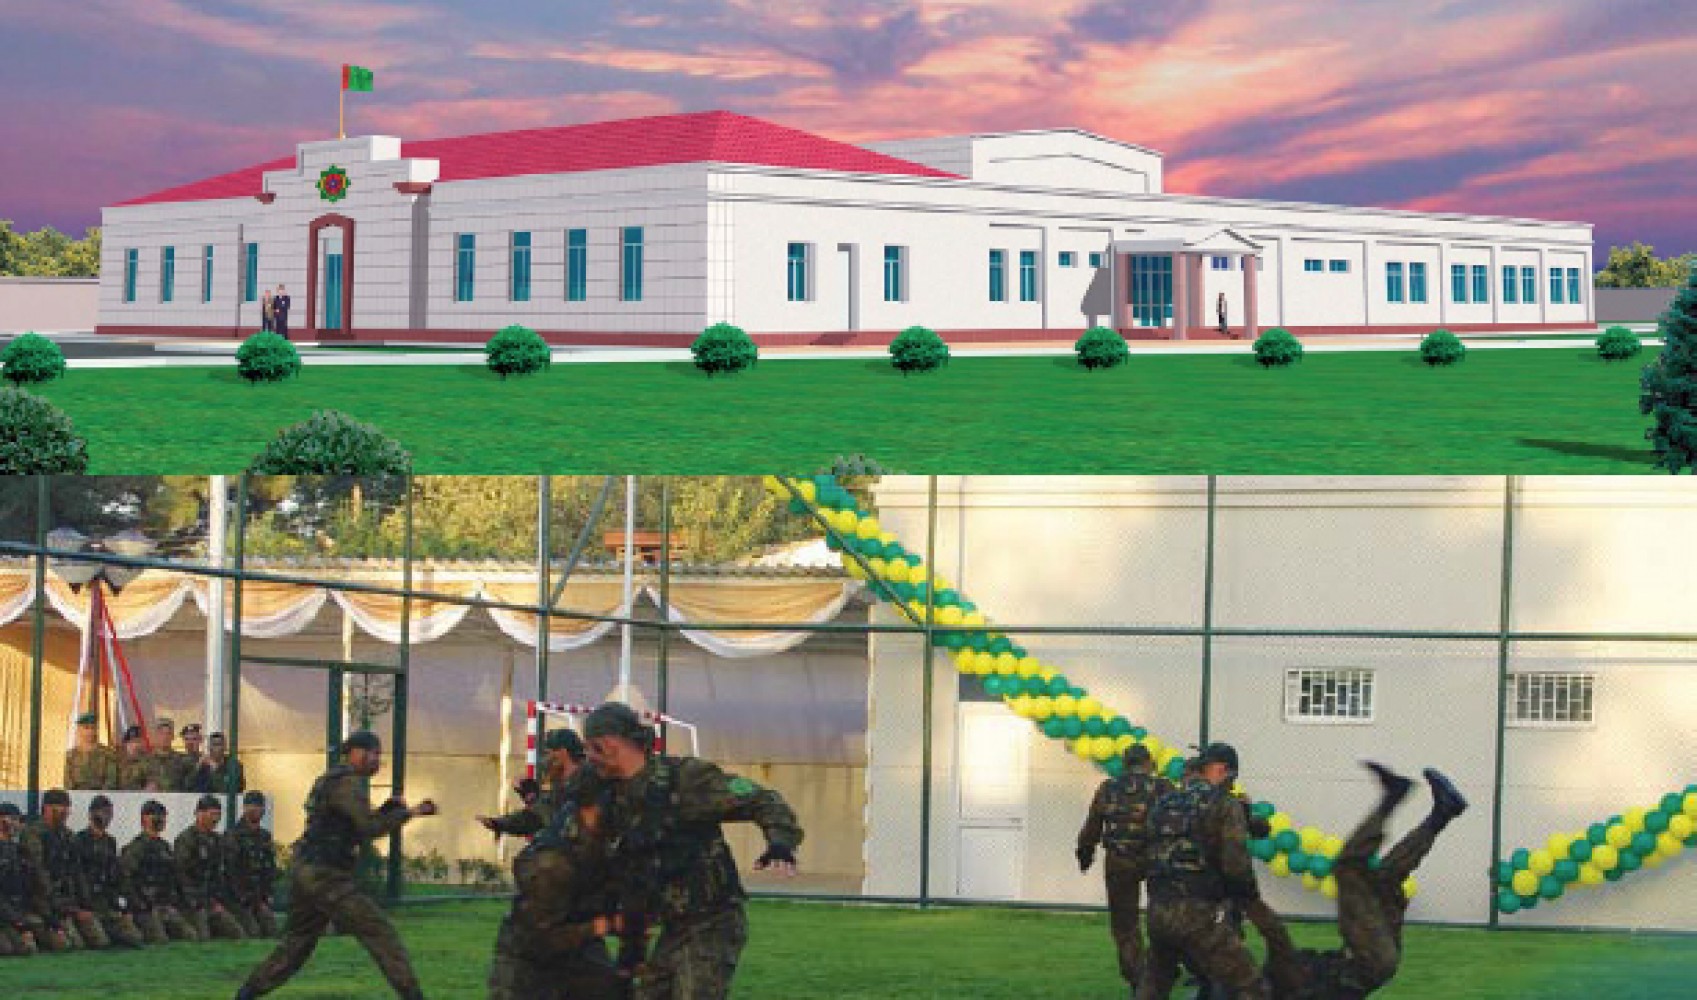 EDUCATION CENTER OF TURKMENISTAN MINISTRY OF NATIONAL SECURITY